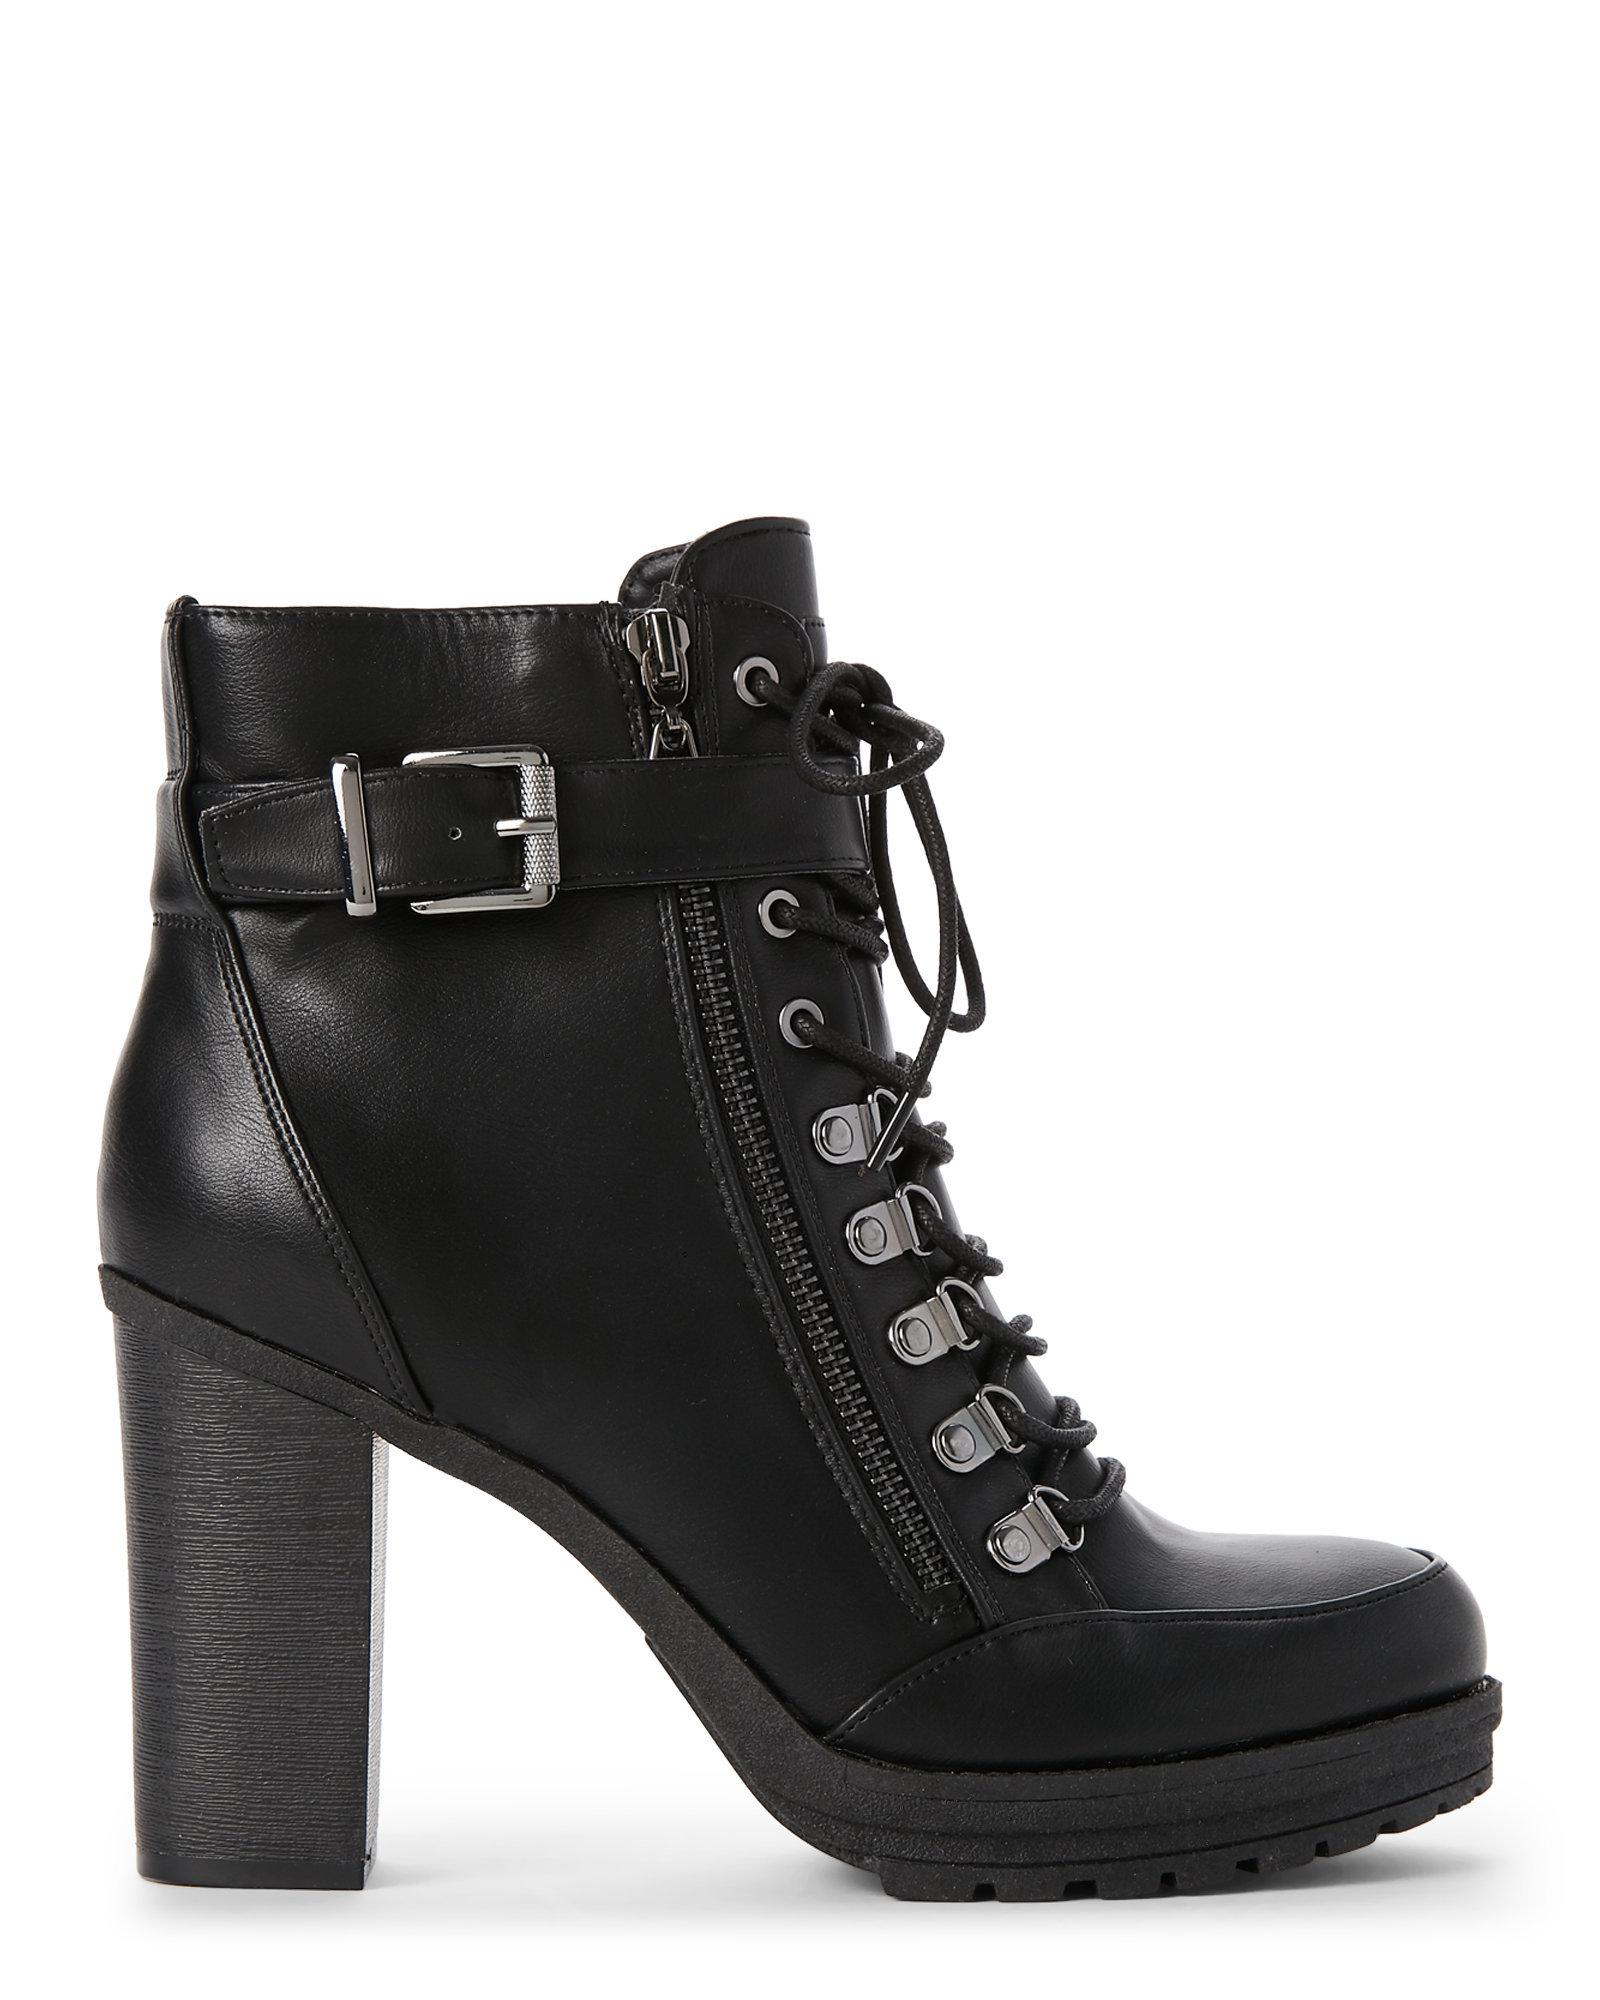 Lyst - G By Guess Black Grazzy High Heel Combat Boots in Black